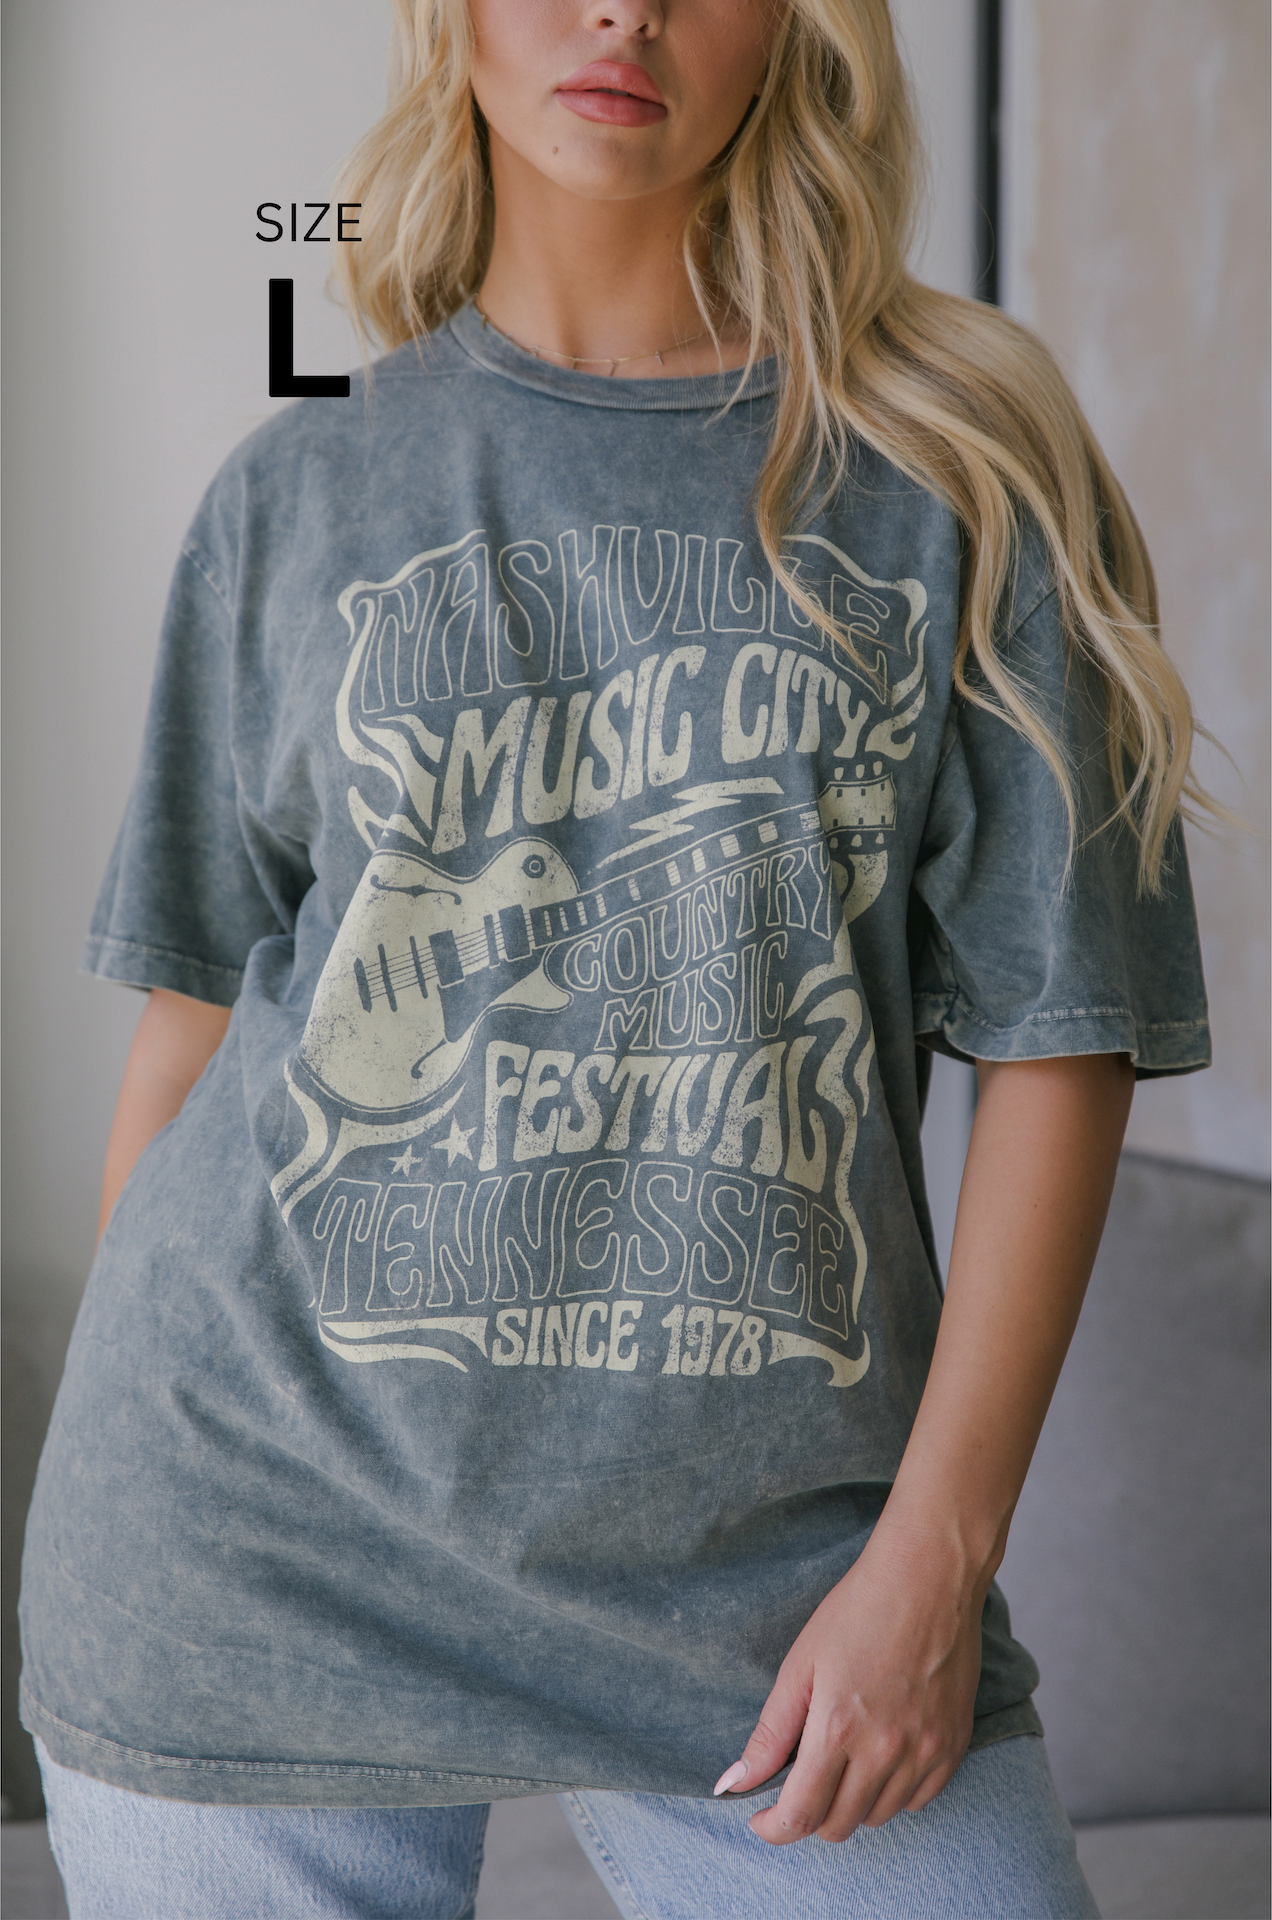 Nashville music city country music festival Tennessee since 1978 graphic tee